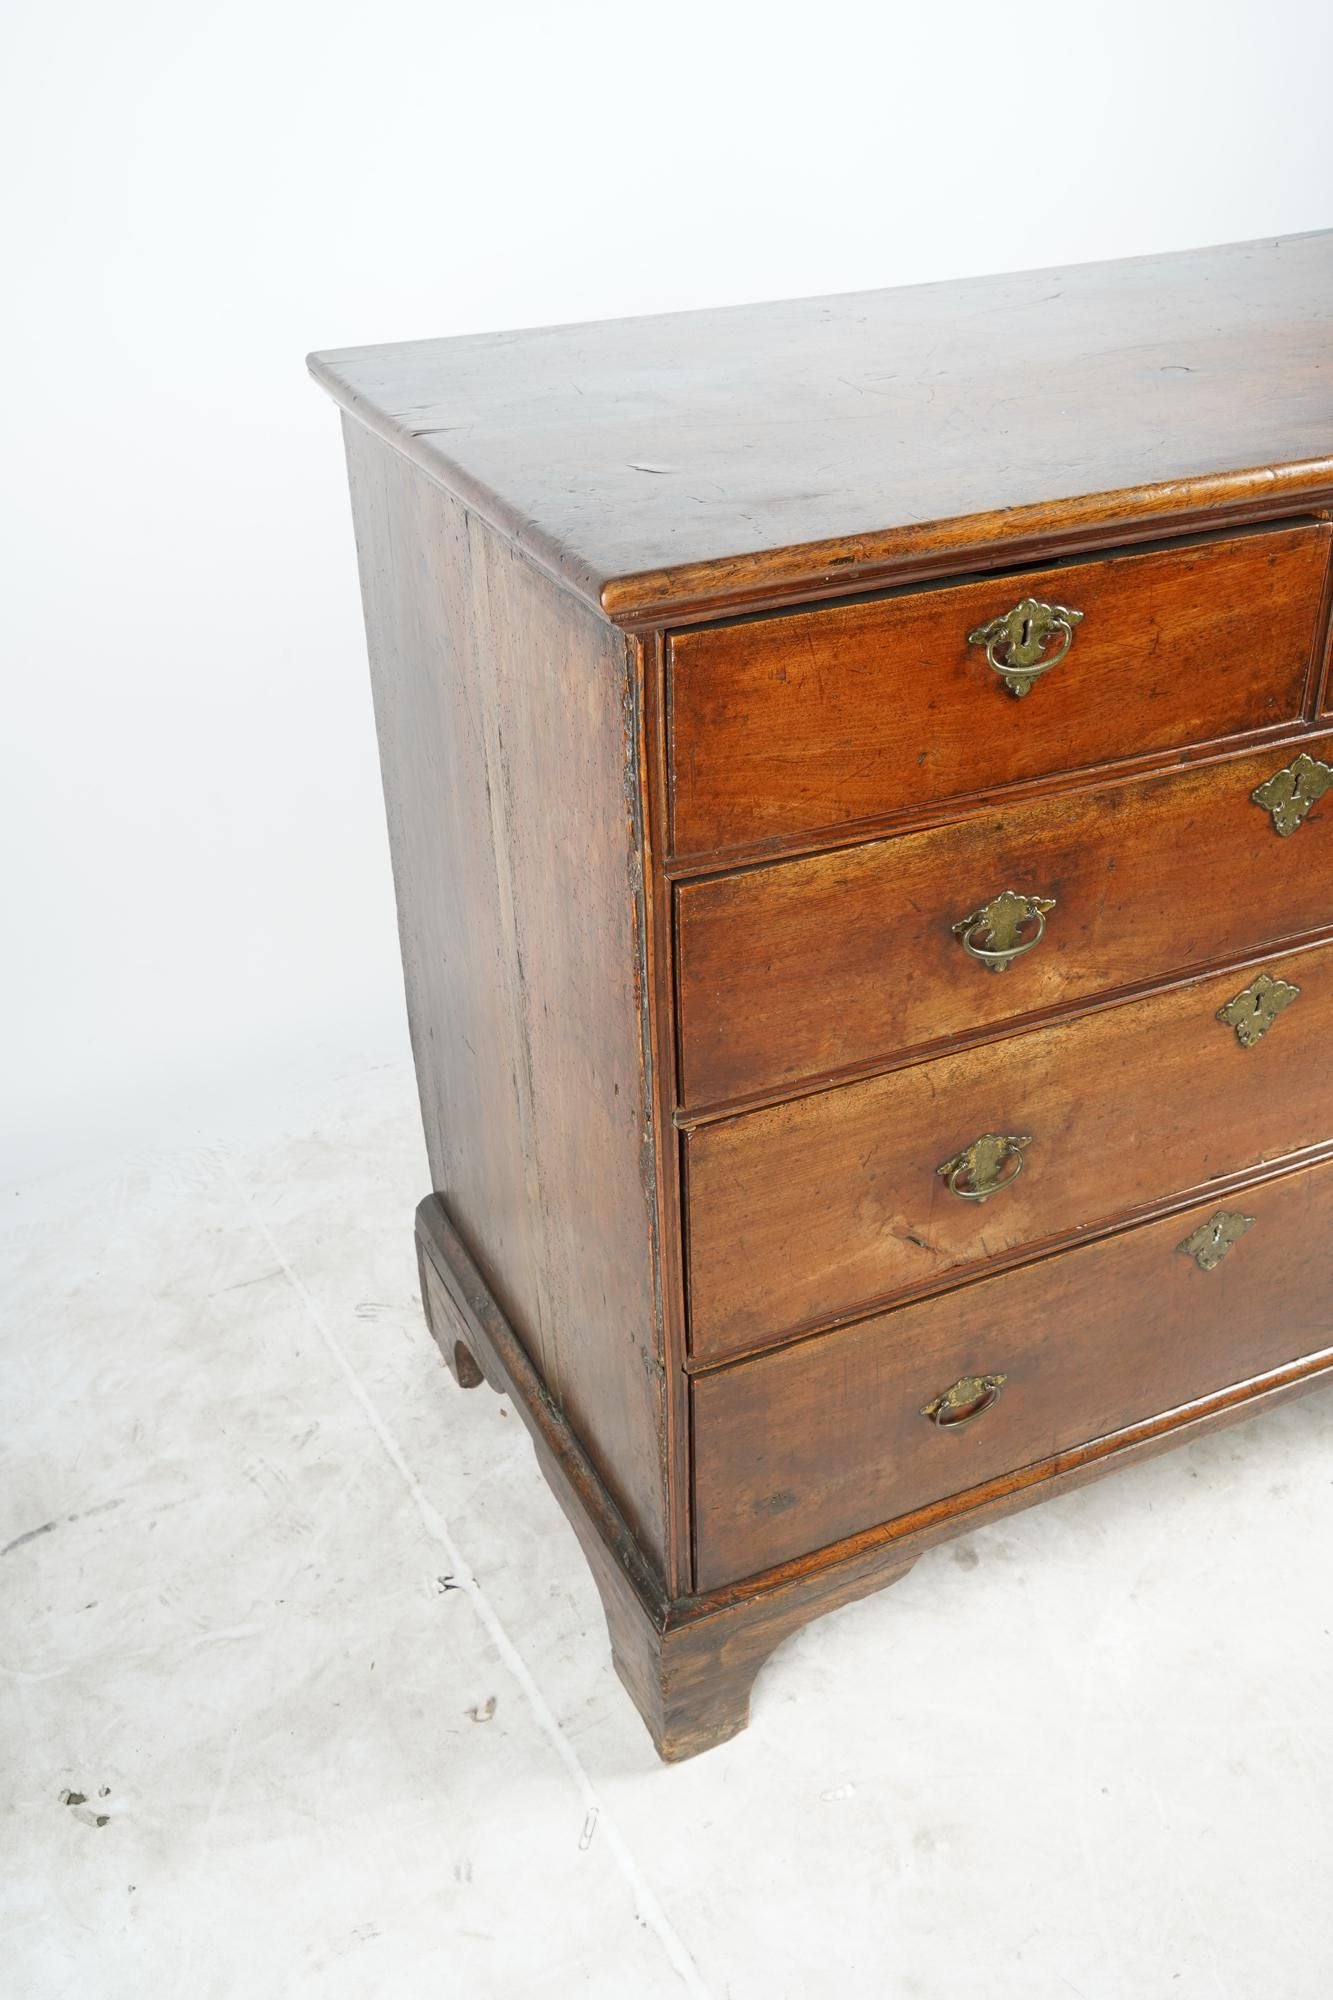 AF4-100: ANTIQUE LATE 18TH C AMERICAN FEDERAL WALNUT CHEST OF DRAWERS